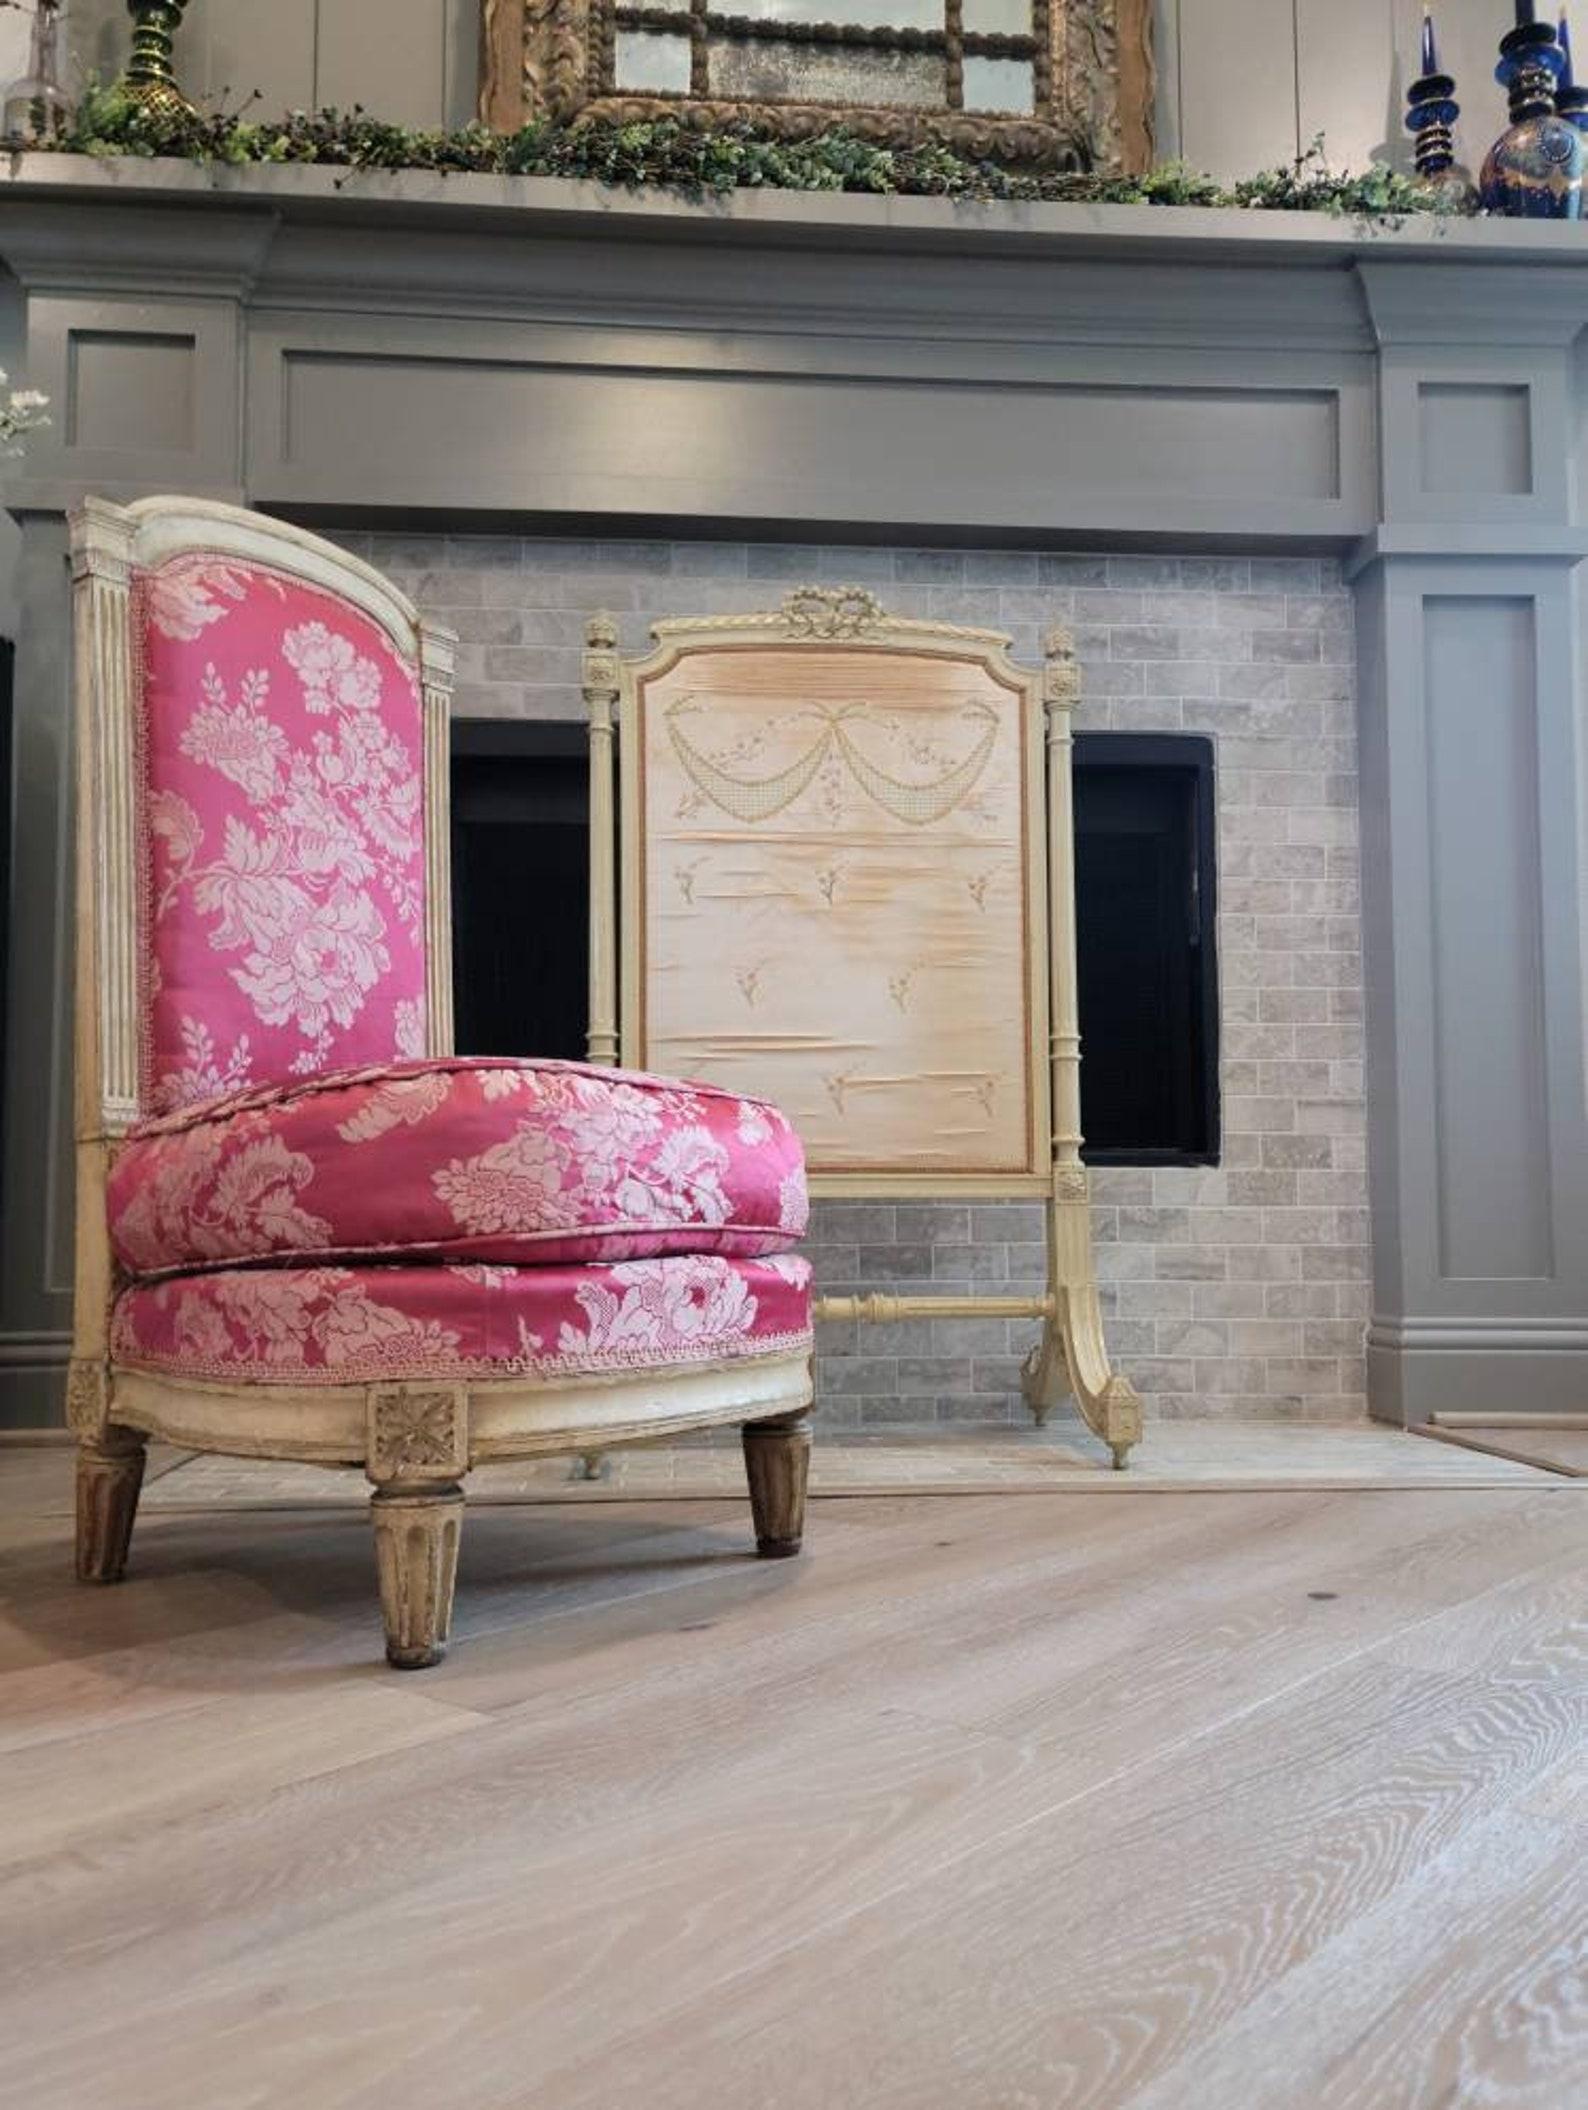 A period Louis XVI (1772-1792) French boudoir fireside chair, characterized by elegance, lightness and simplicity of form, and reflecting the final era of royal opulence before the upheaval of the French Revolution, this beautiful petite antique low